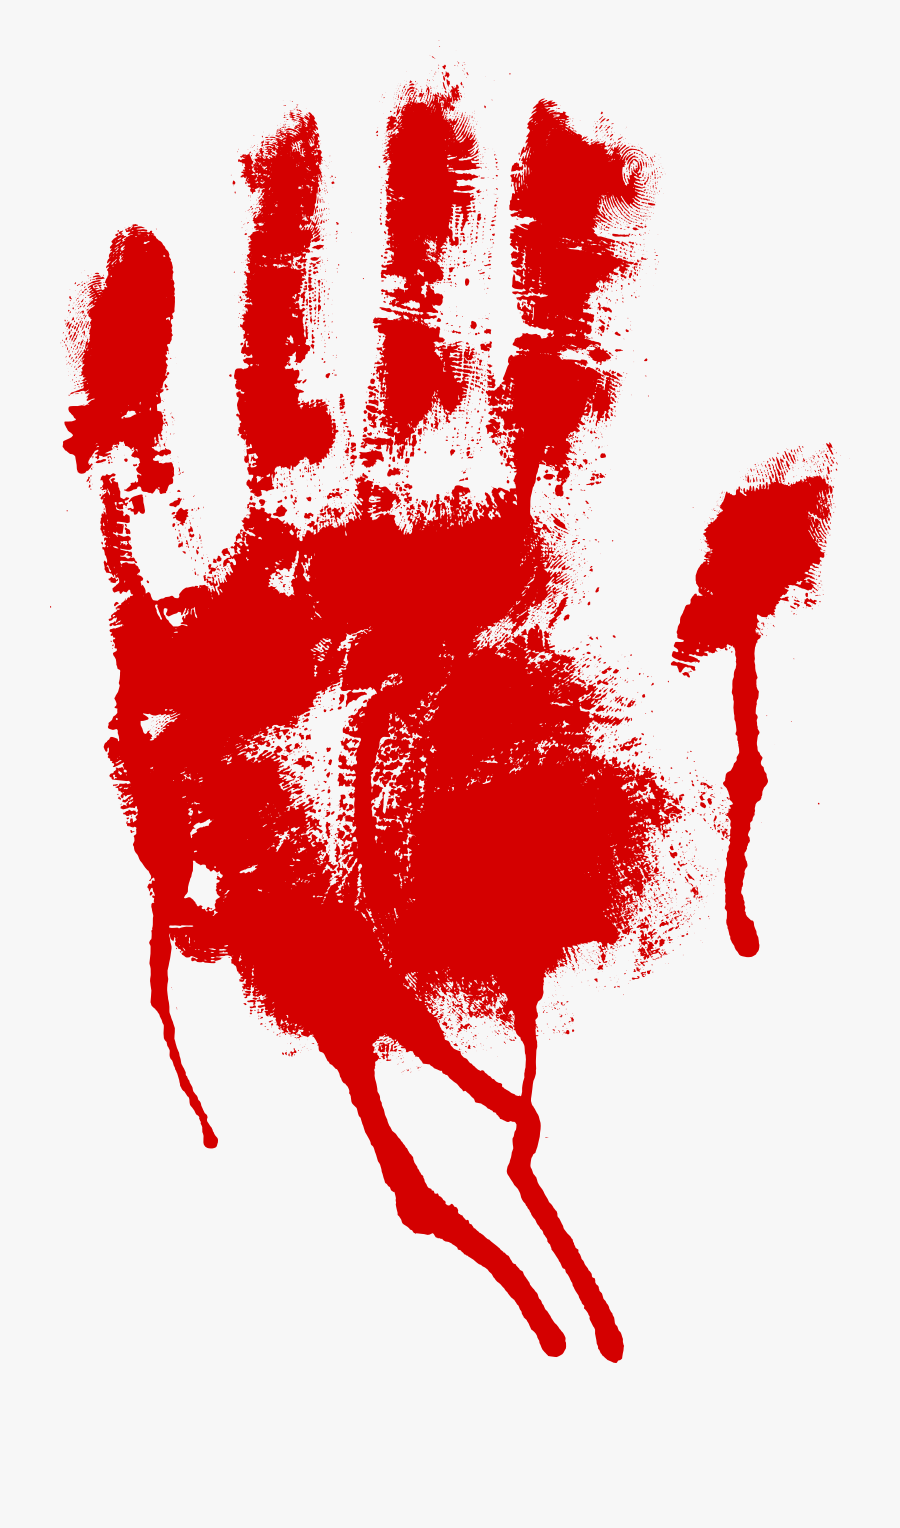 Transparent Bloody Hands Png - Blood Hand Print Clipart Transparent Background, Transparent Clipart